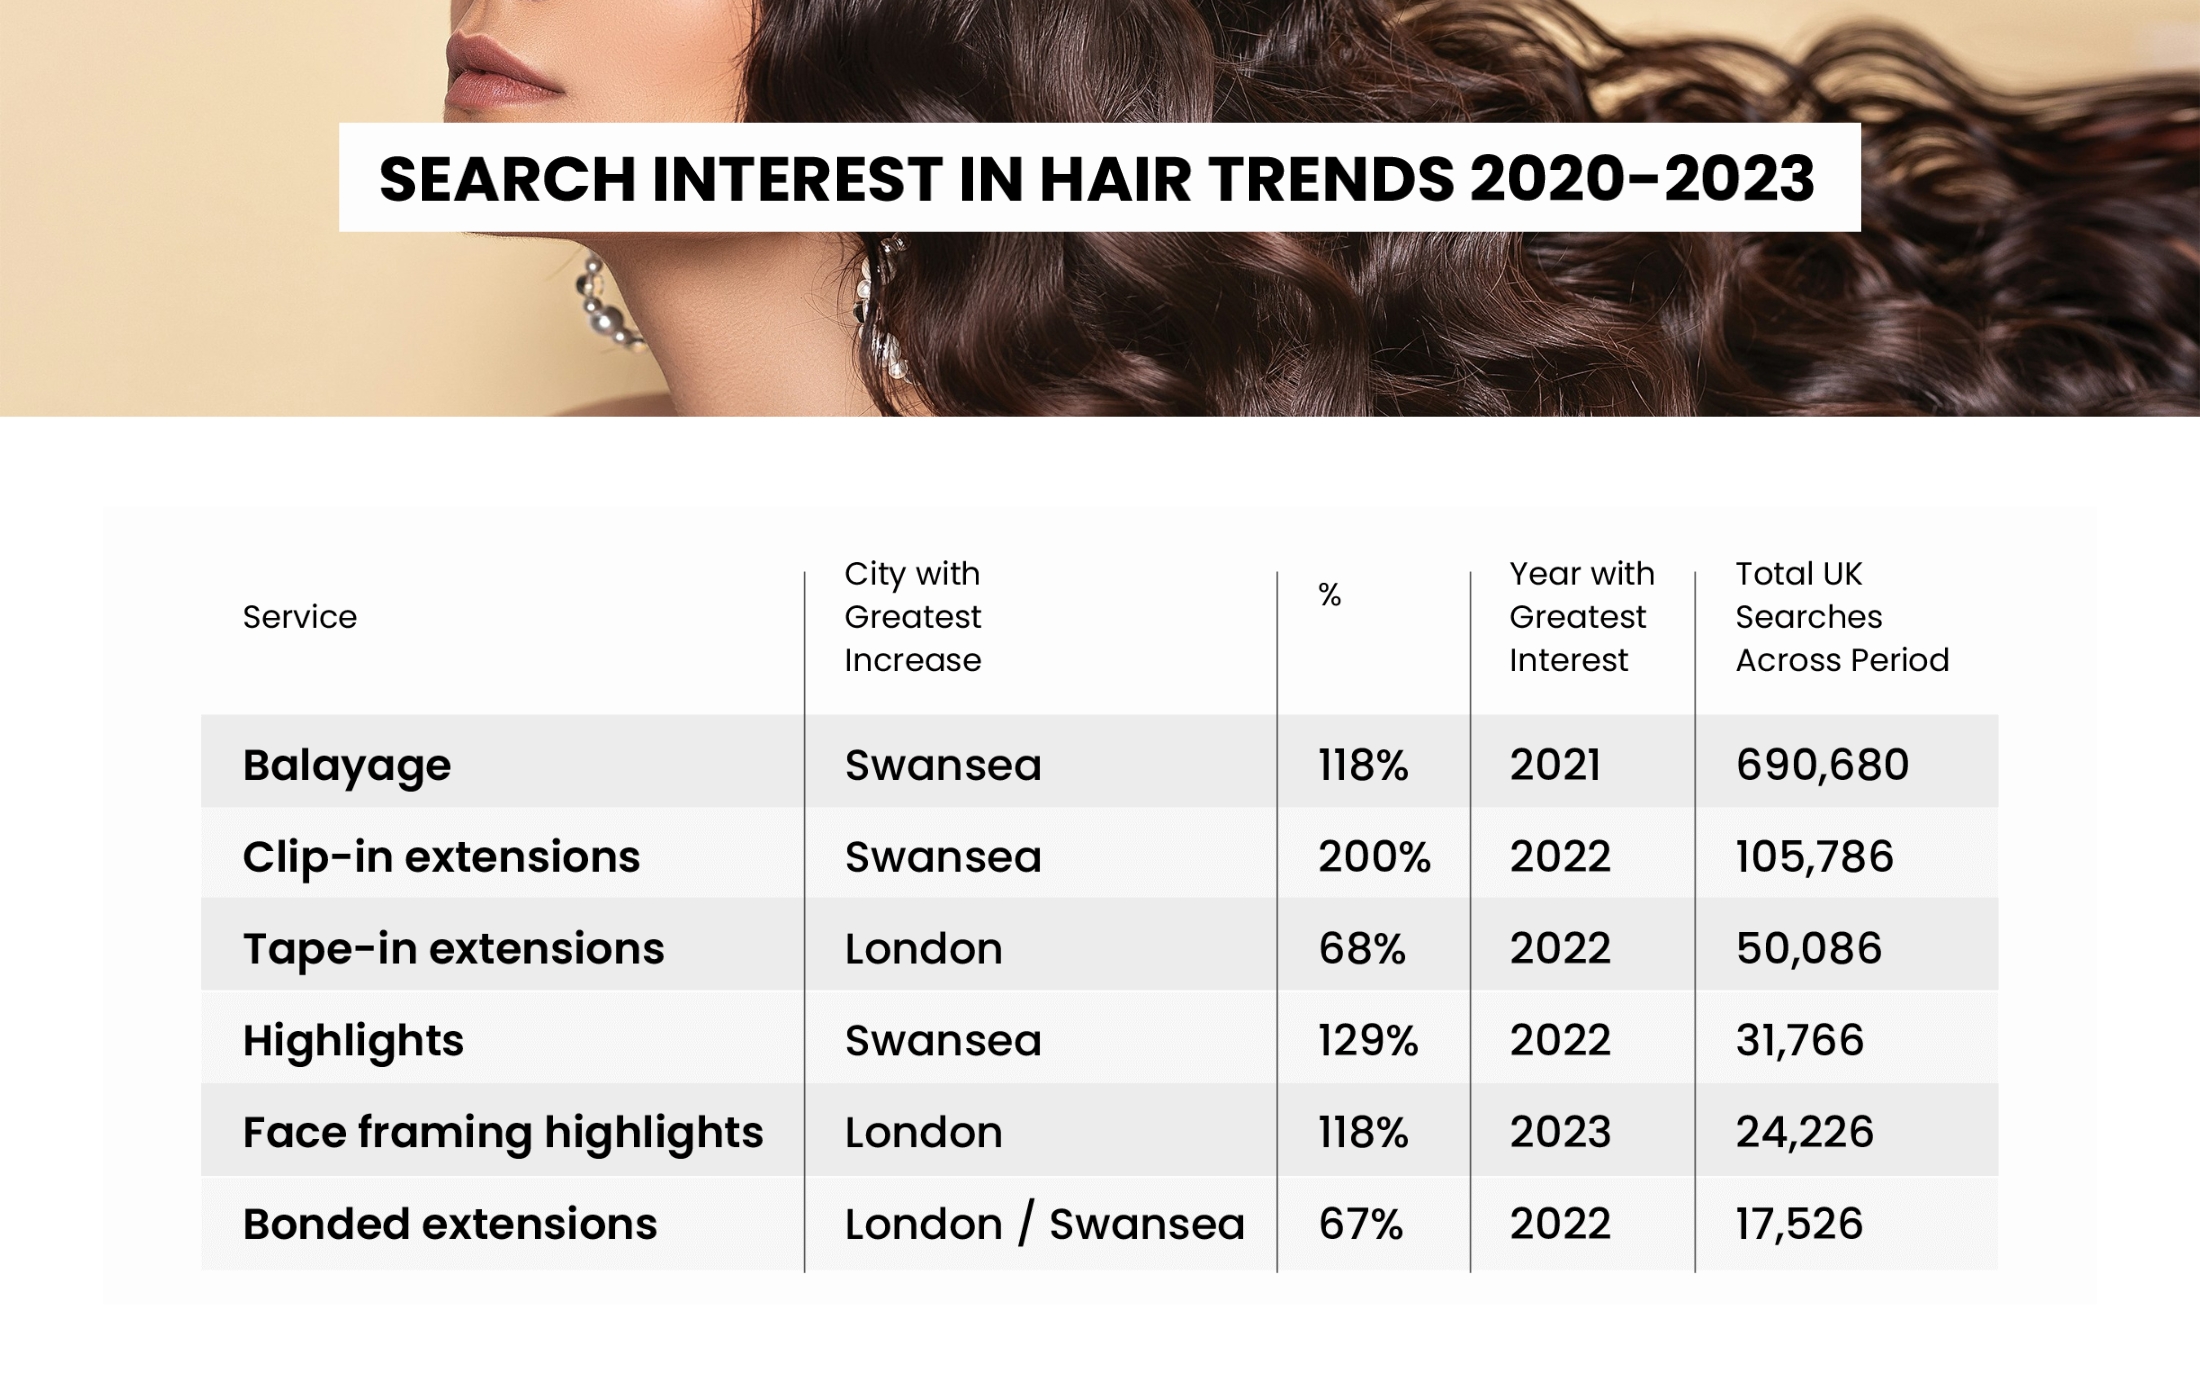 Evolution of Hair Trends: A Look at the Most Popular Styles from 2020 to 2023